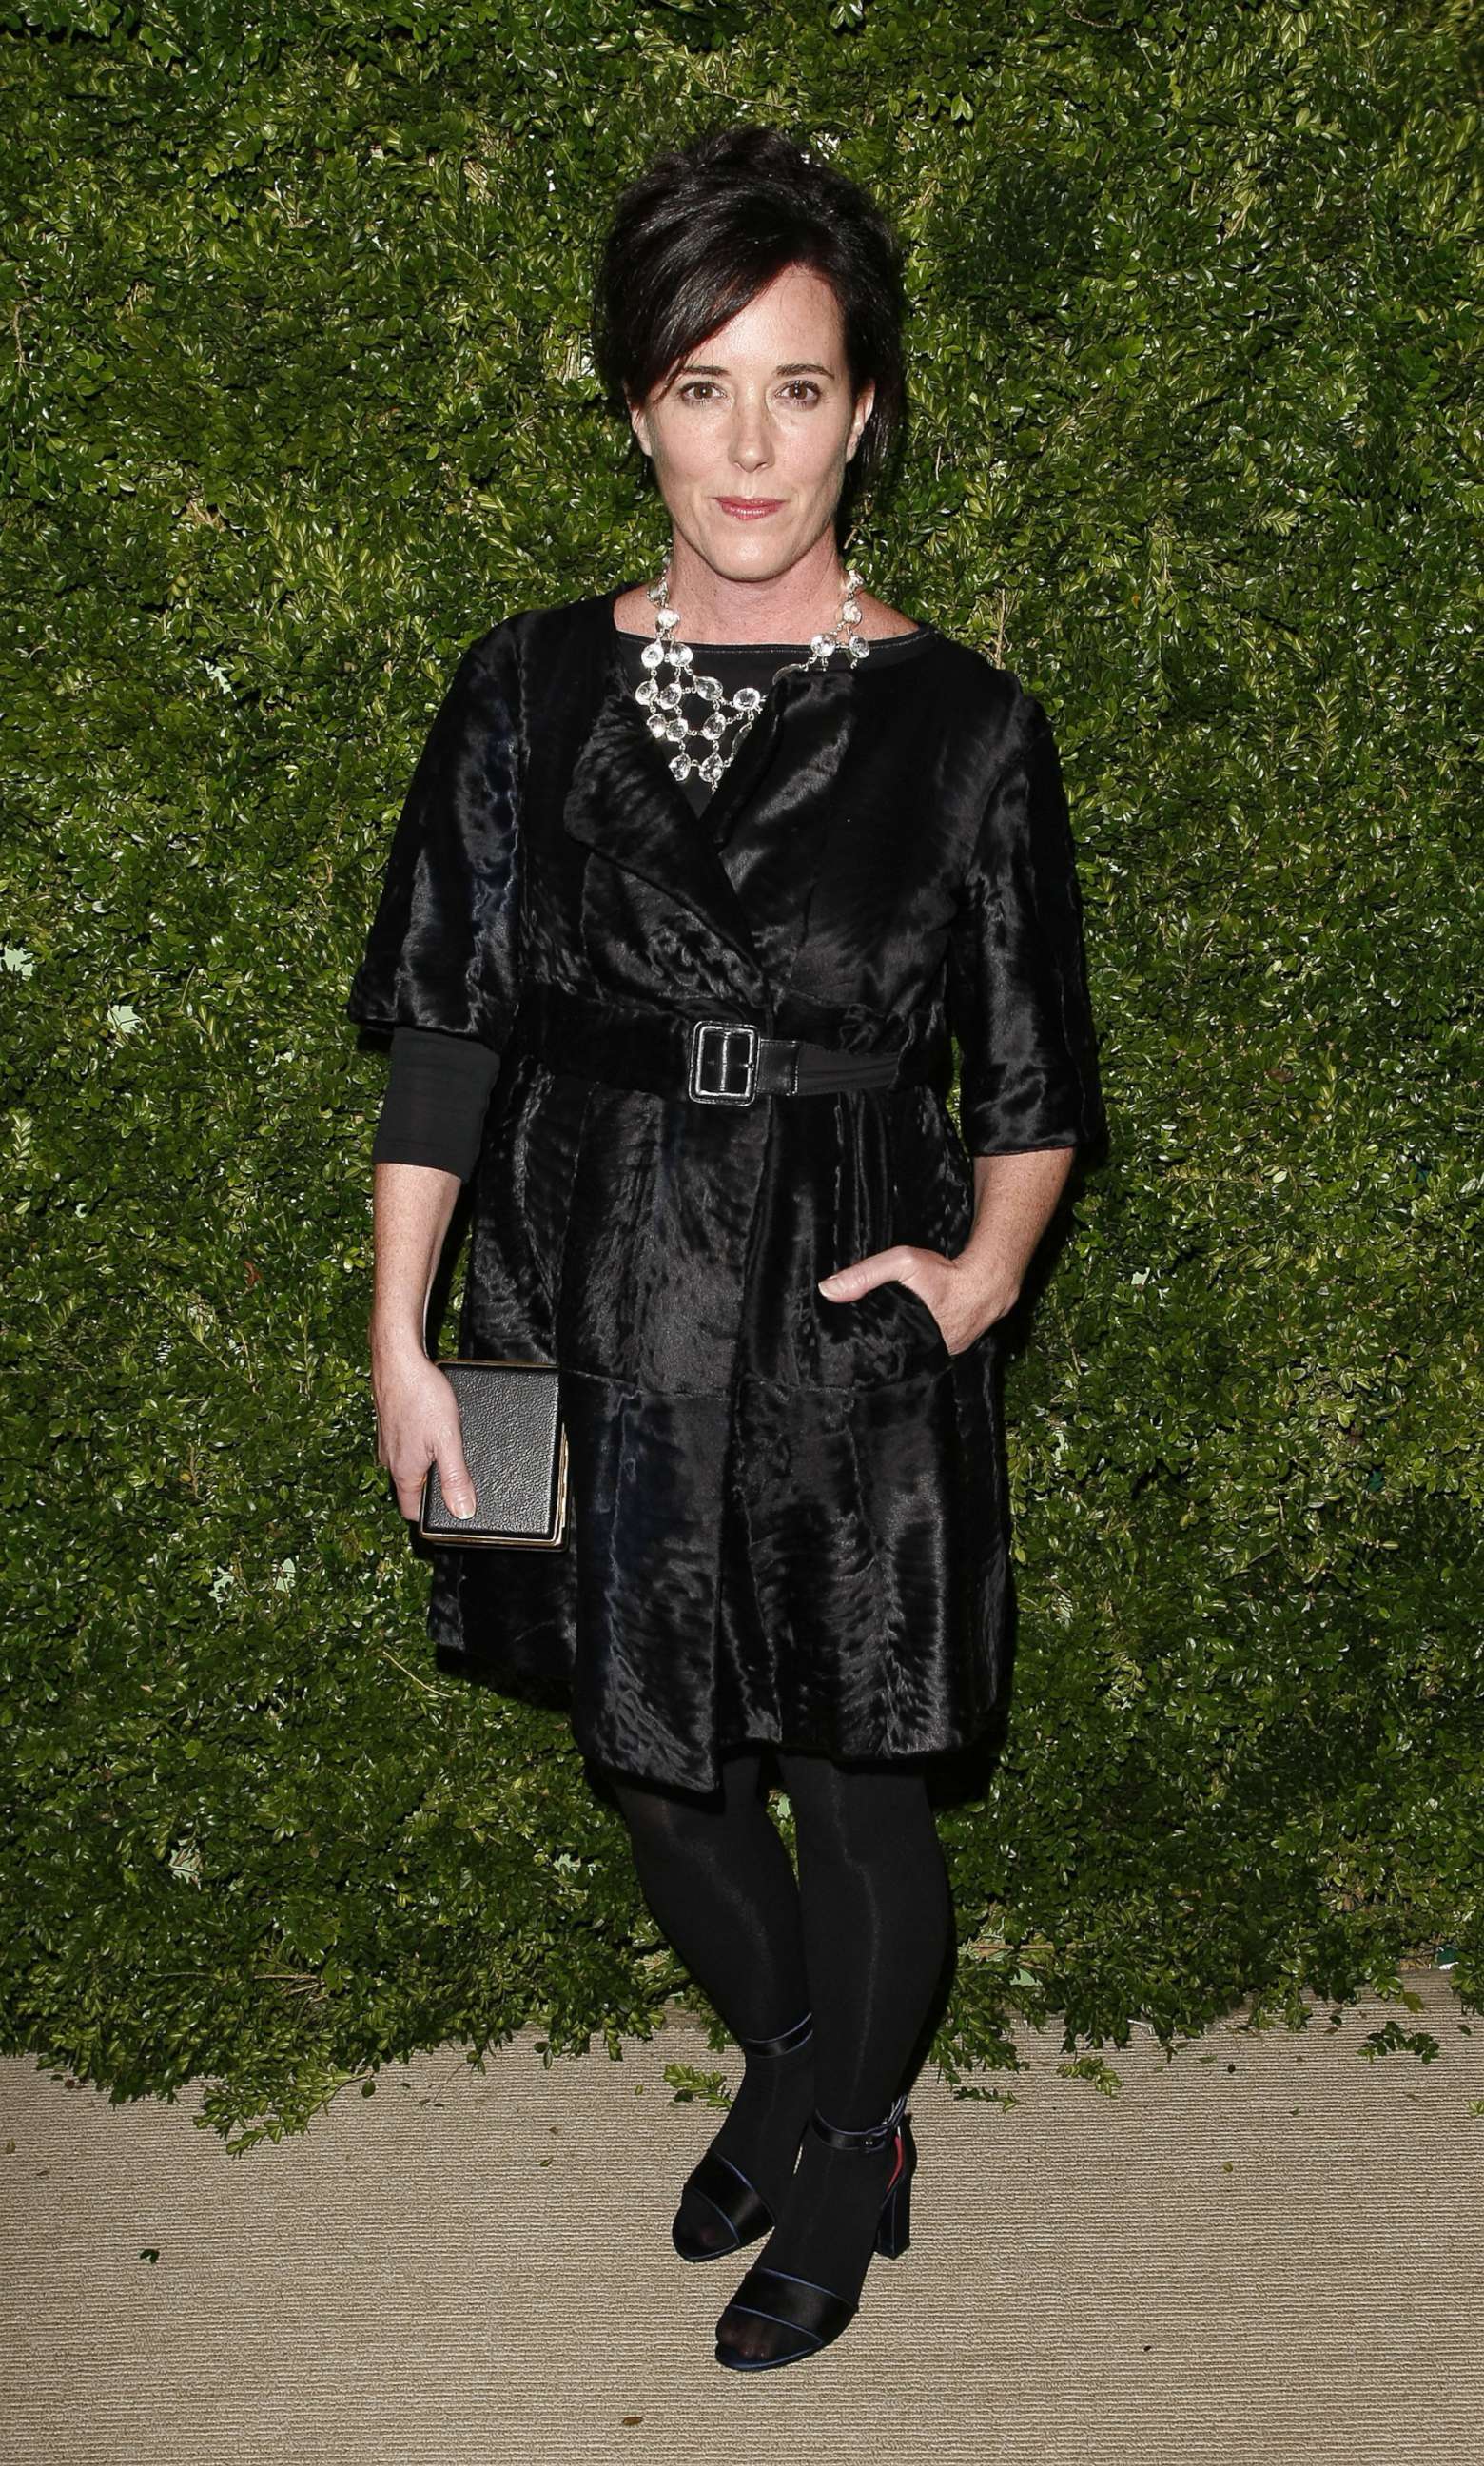 PHOTO: Kate Spade attends the 5th Anniversary of the CFDA/Vogue Fashion Fund at Skylight Studios, Nov. 17, 2008 in New York City.